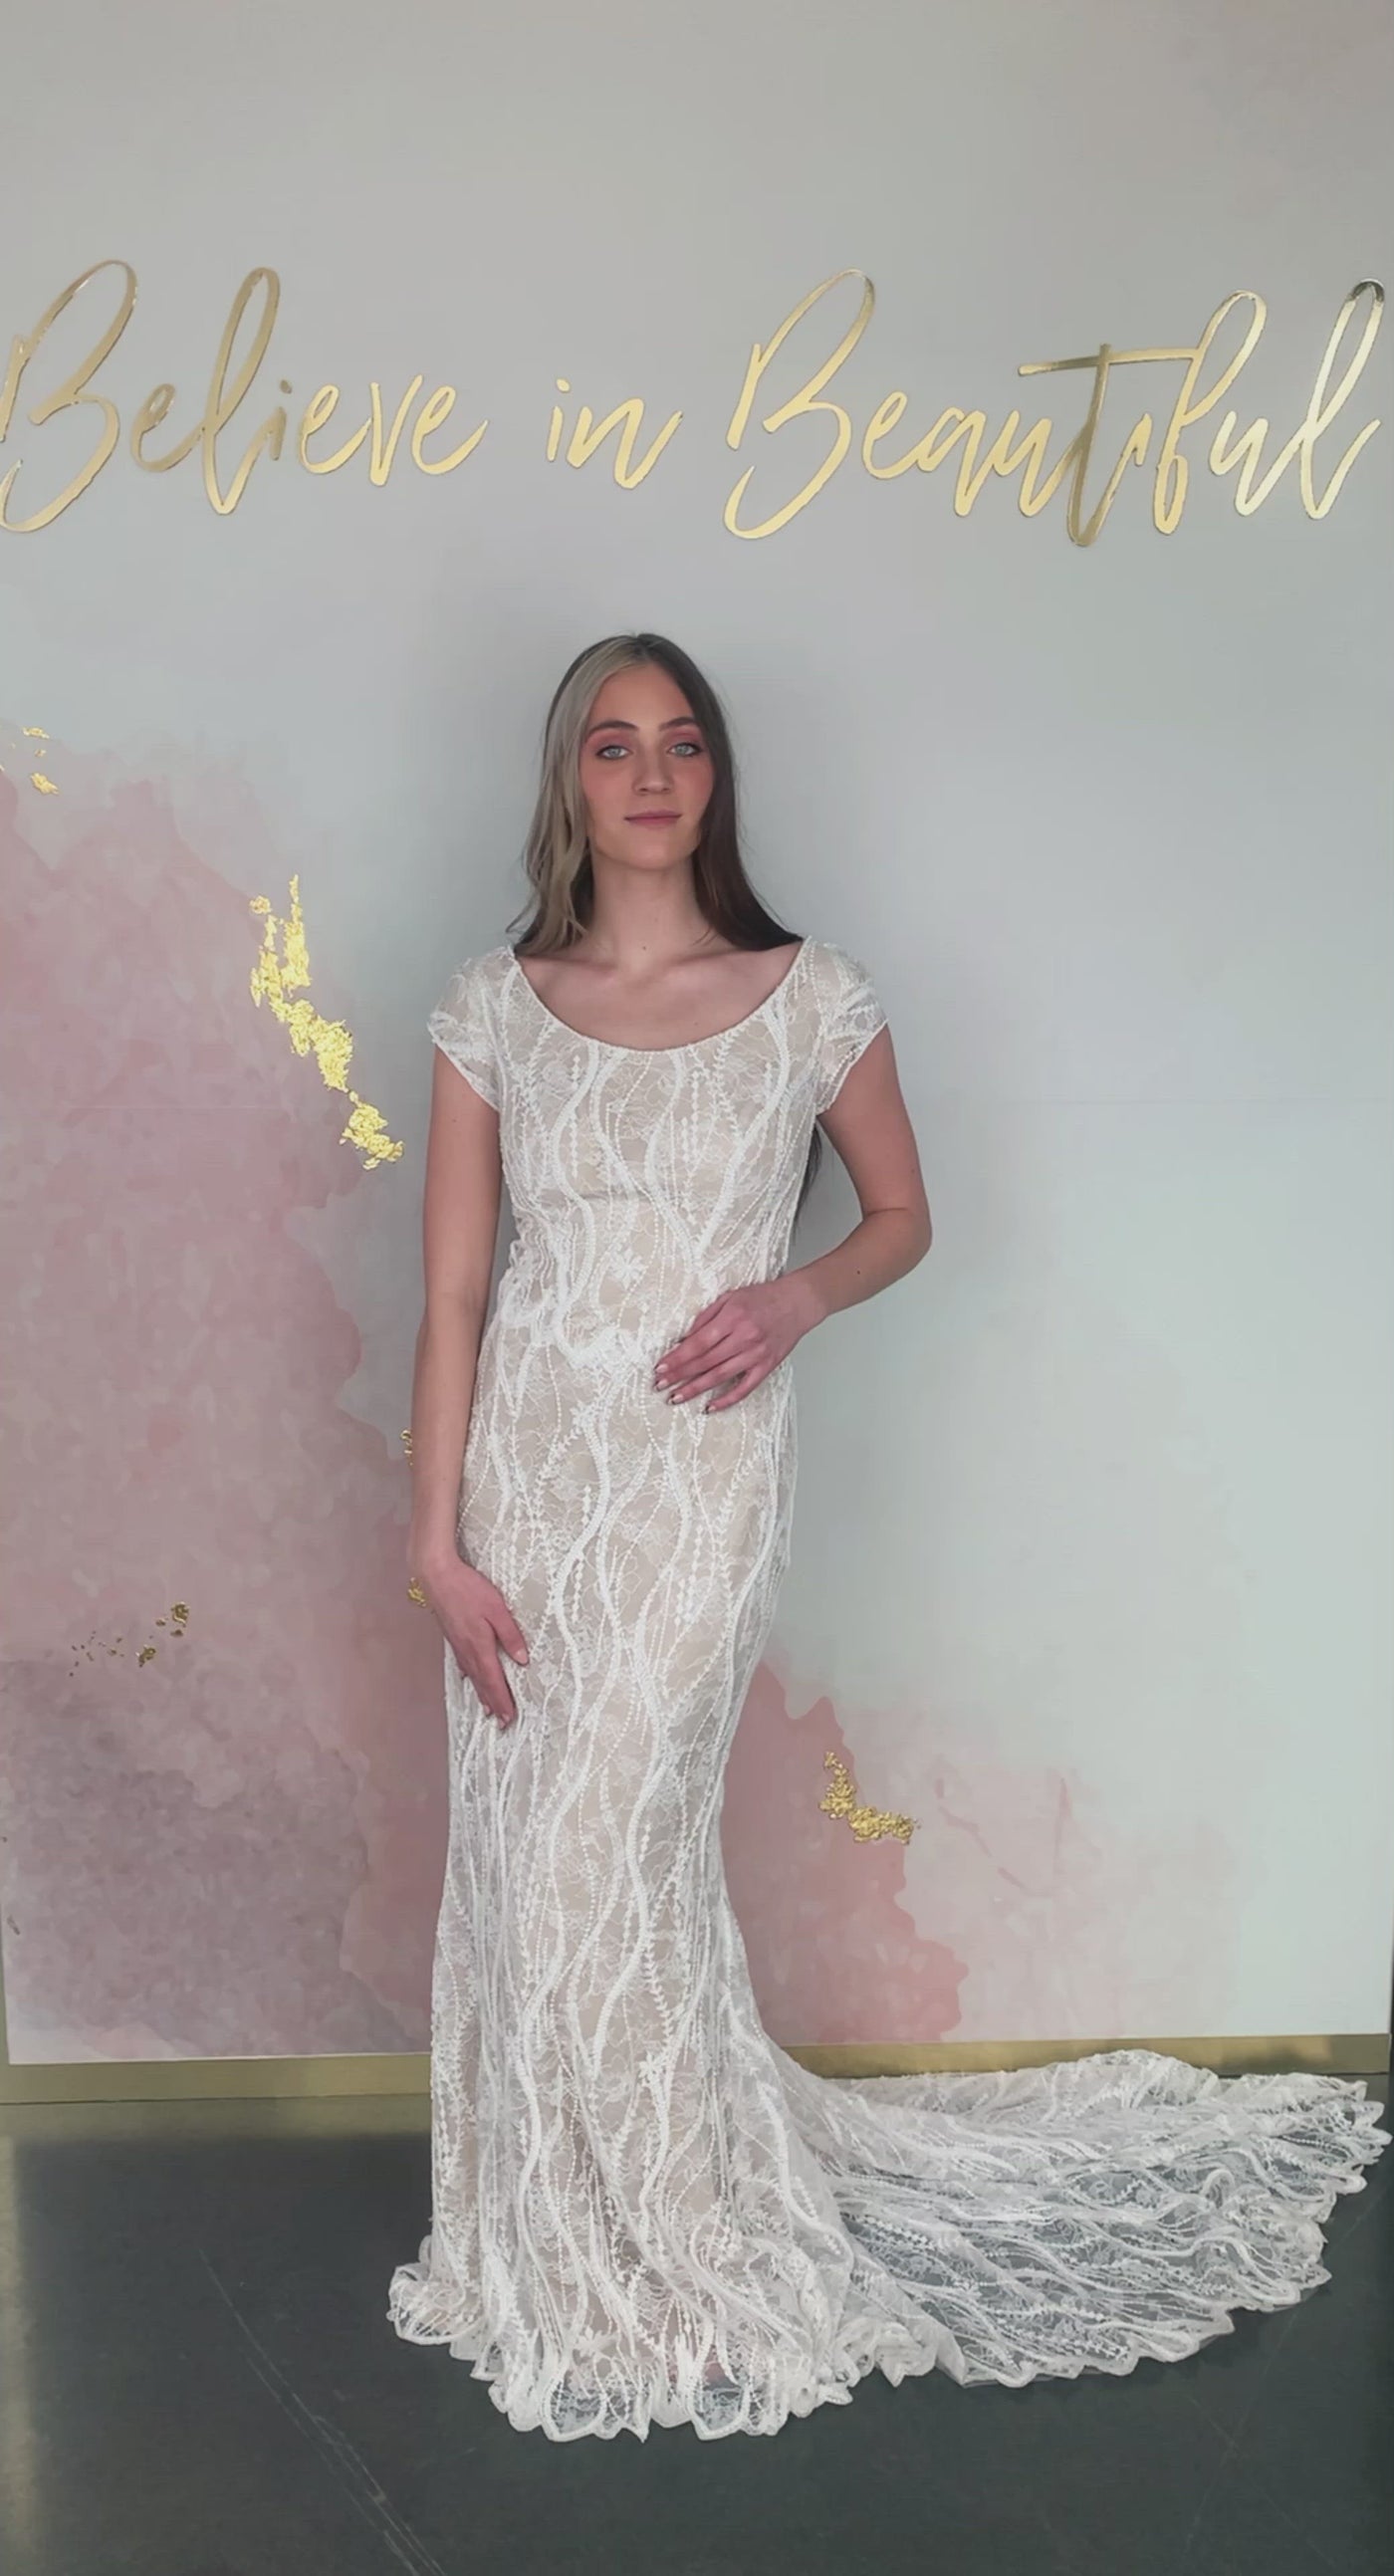 A video featuring our Atlantis wedding dress with its swirly, beaded lace detailing and wide scoop neckline.